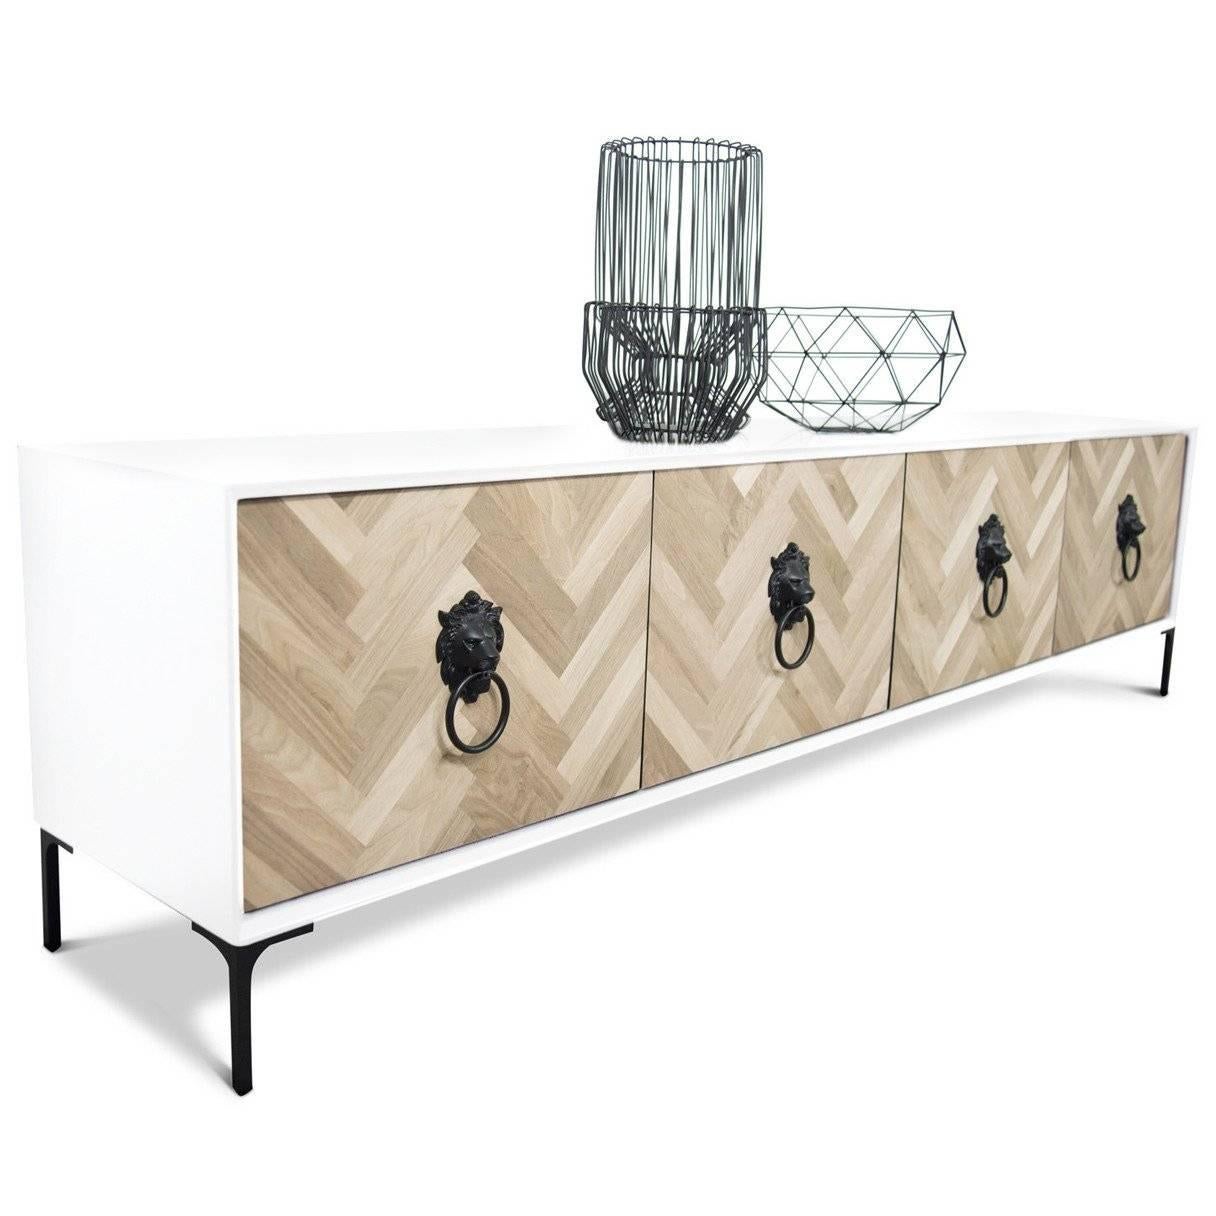 Introducing our newest addition to the Amalfi collection. This four-door credenza features hand-cut walnut chevron detail and white lacquer case finish with lion head hardware.
 
Dimensions:
84